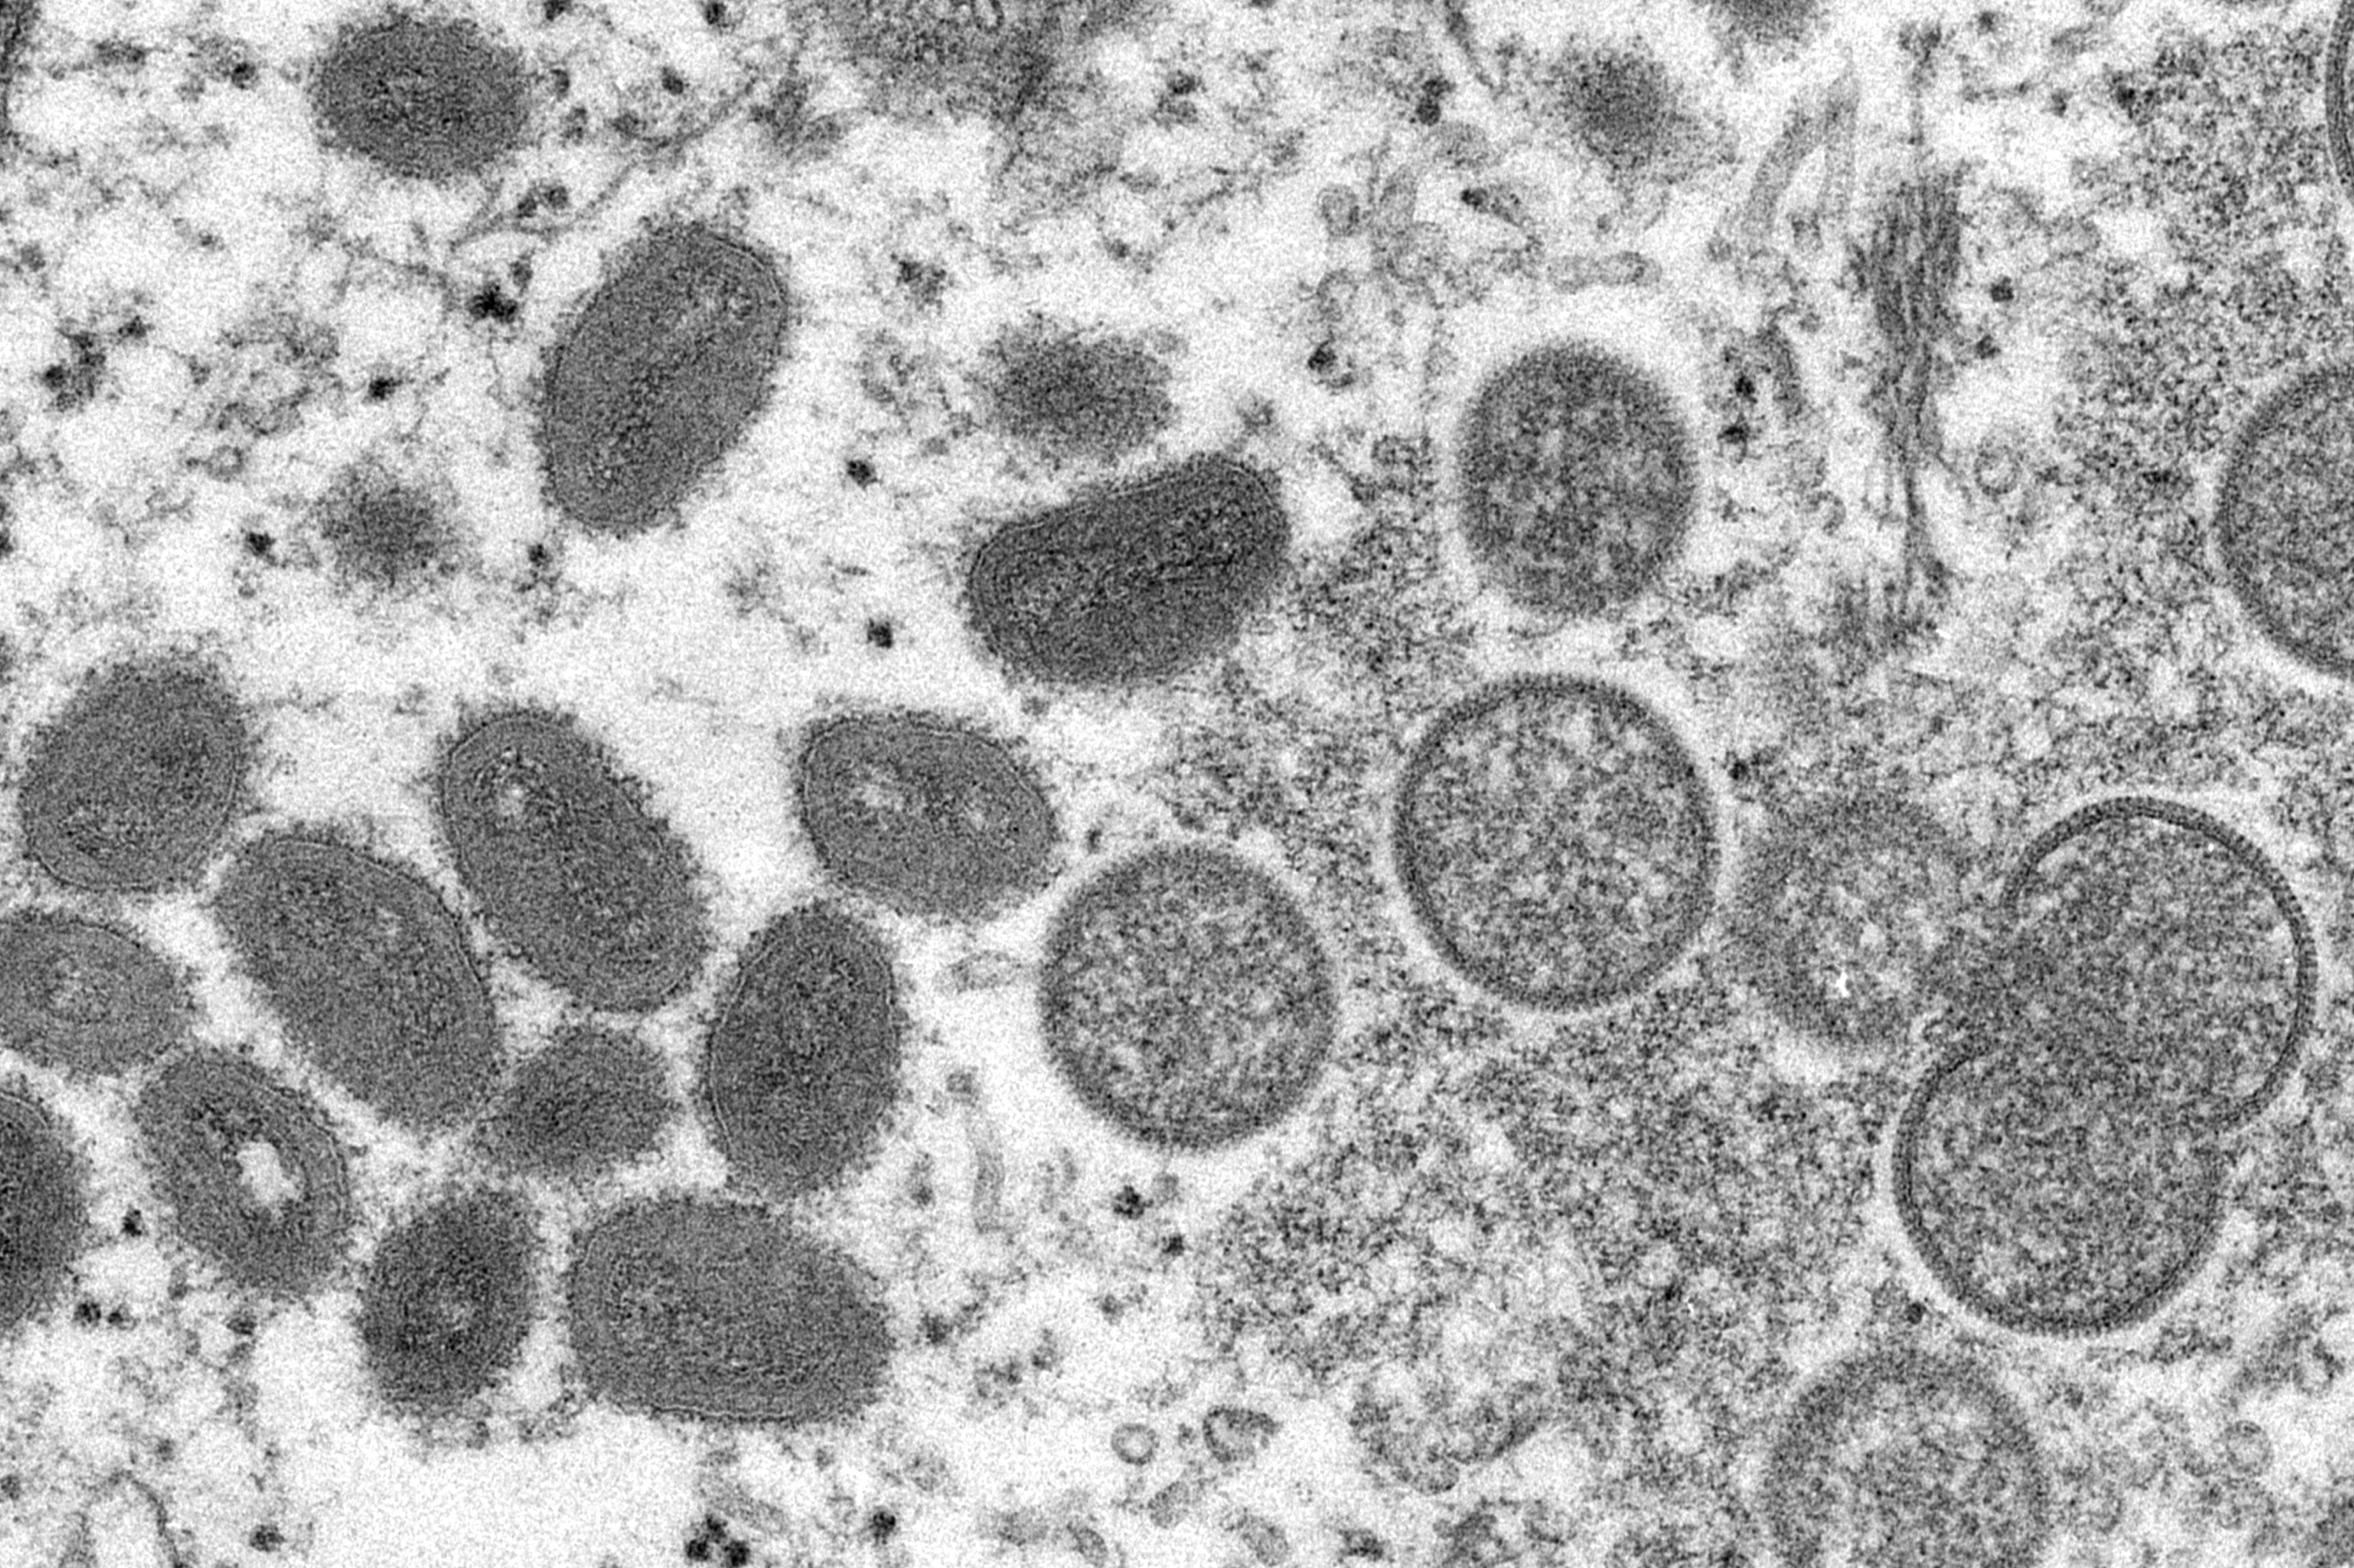 Israel Reports First Case of Monkeypox, Suspects Others – NBC 7 San Diego